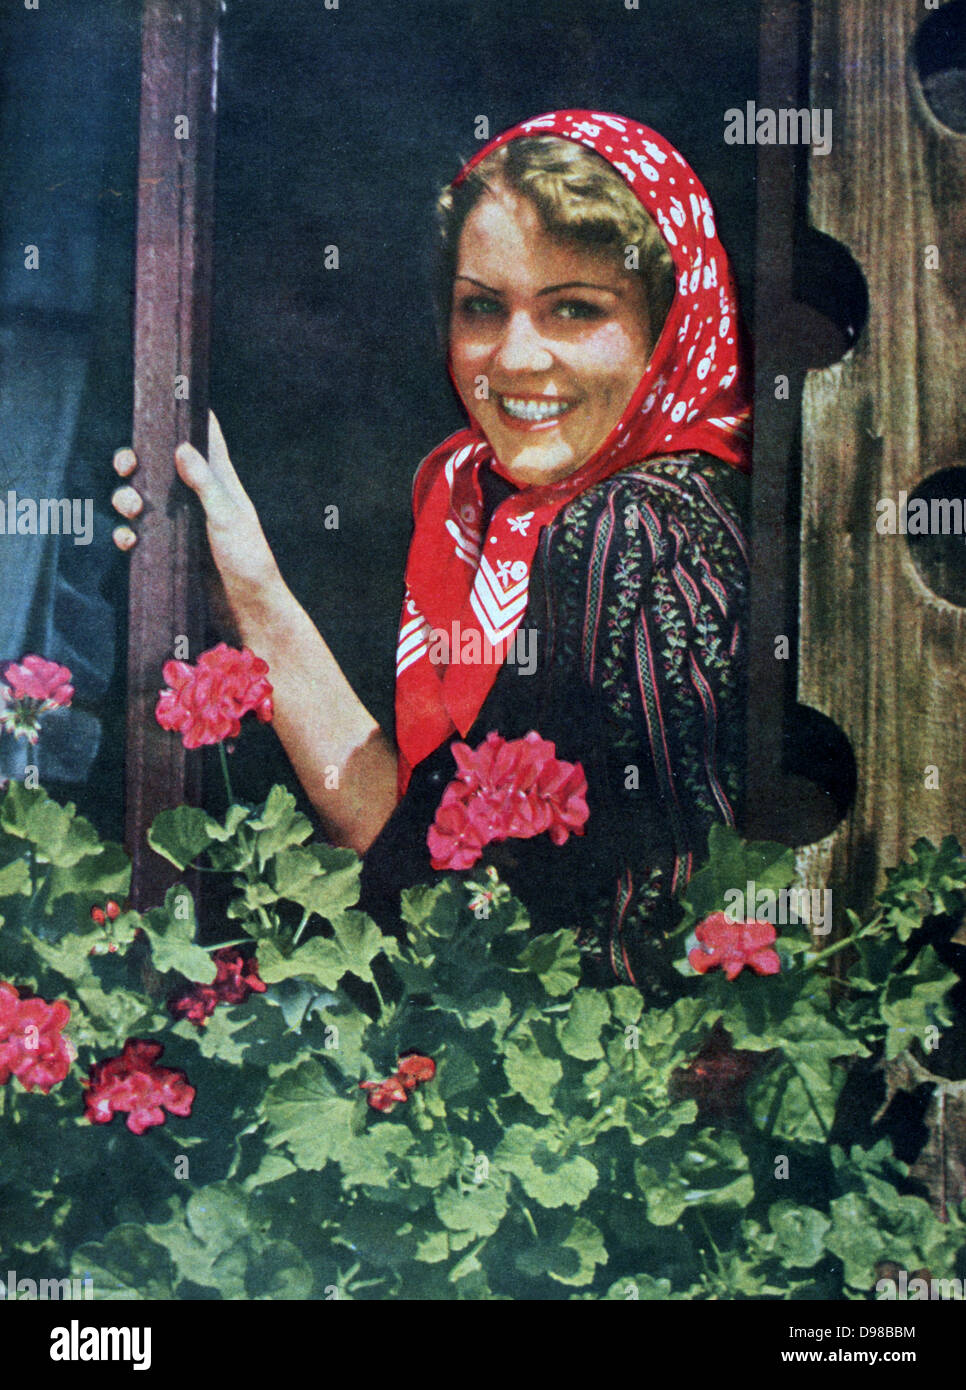 World War II 1939-1945:  Smiling, pretty young girl next door, soldier's sweetheart.  From 'Signal', August 1942, German propaganda magazine produced by the Wehrmacht. Stock Photo